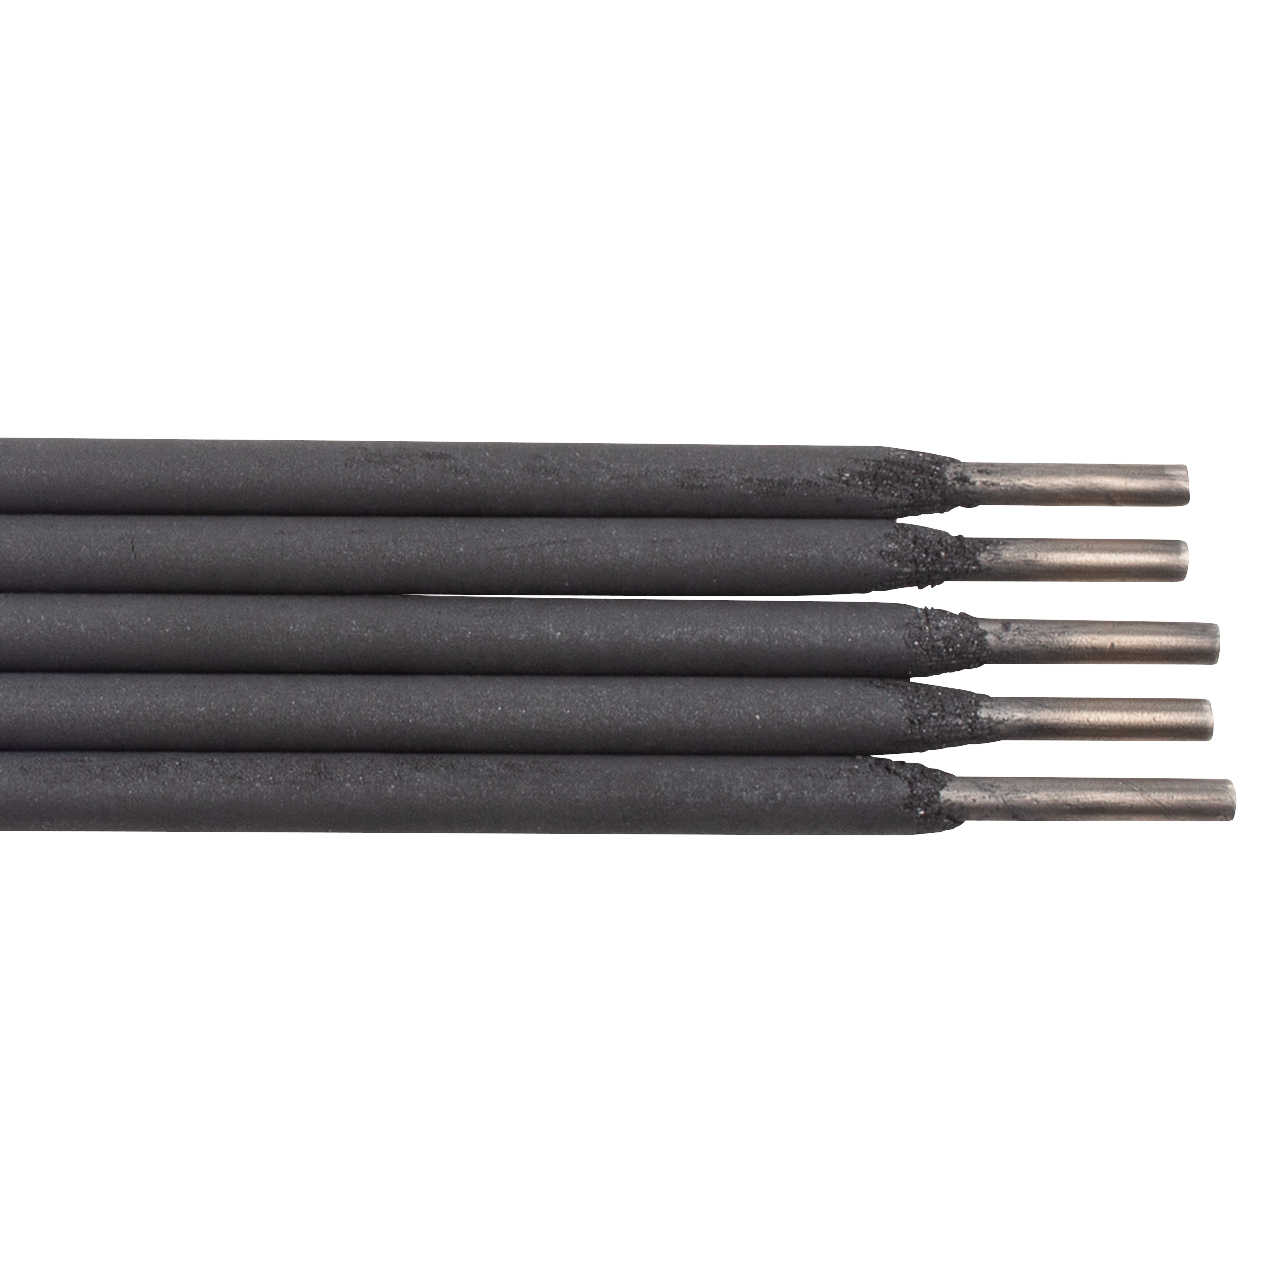 99% Nickel Cast Iron Electrode made from the highest quality